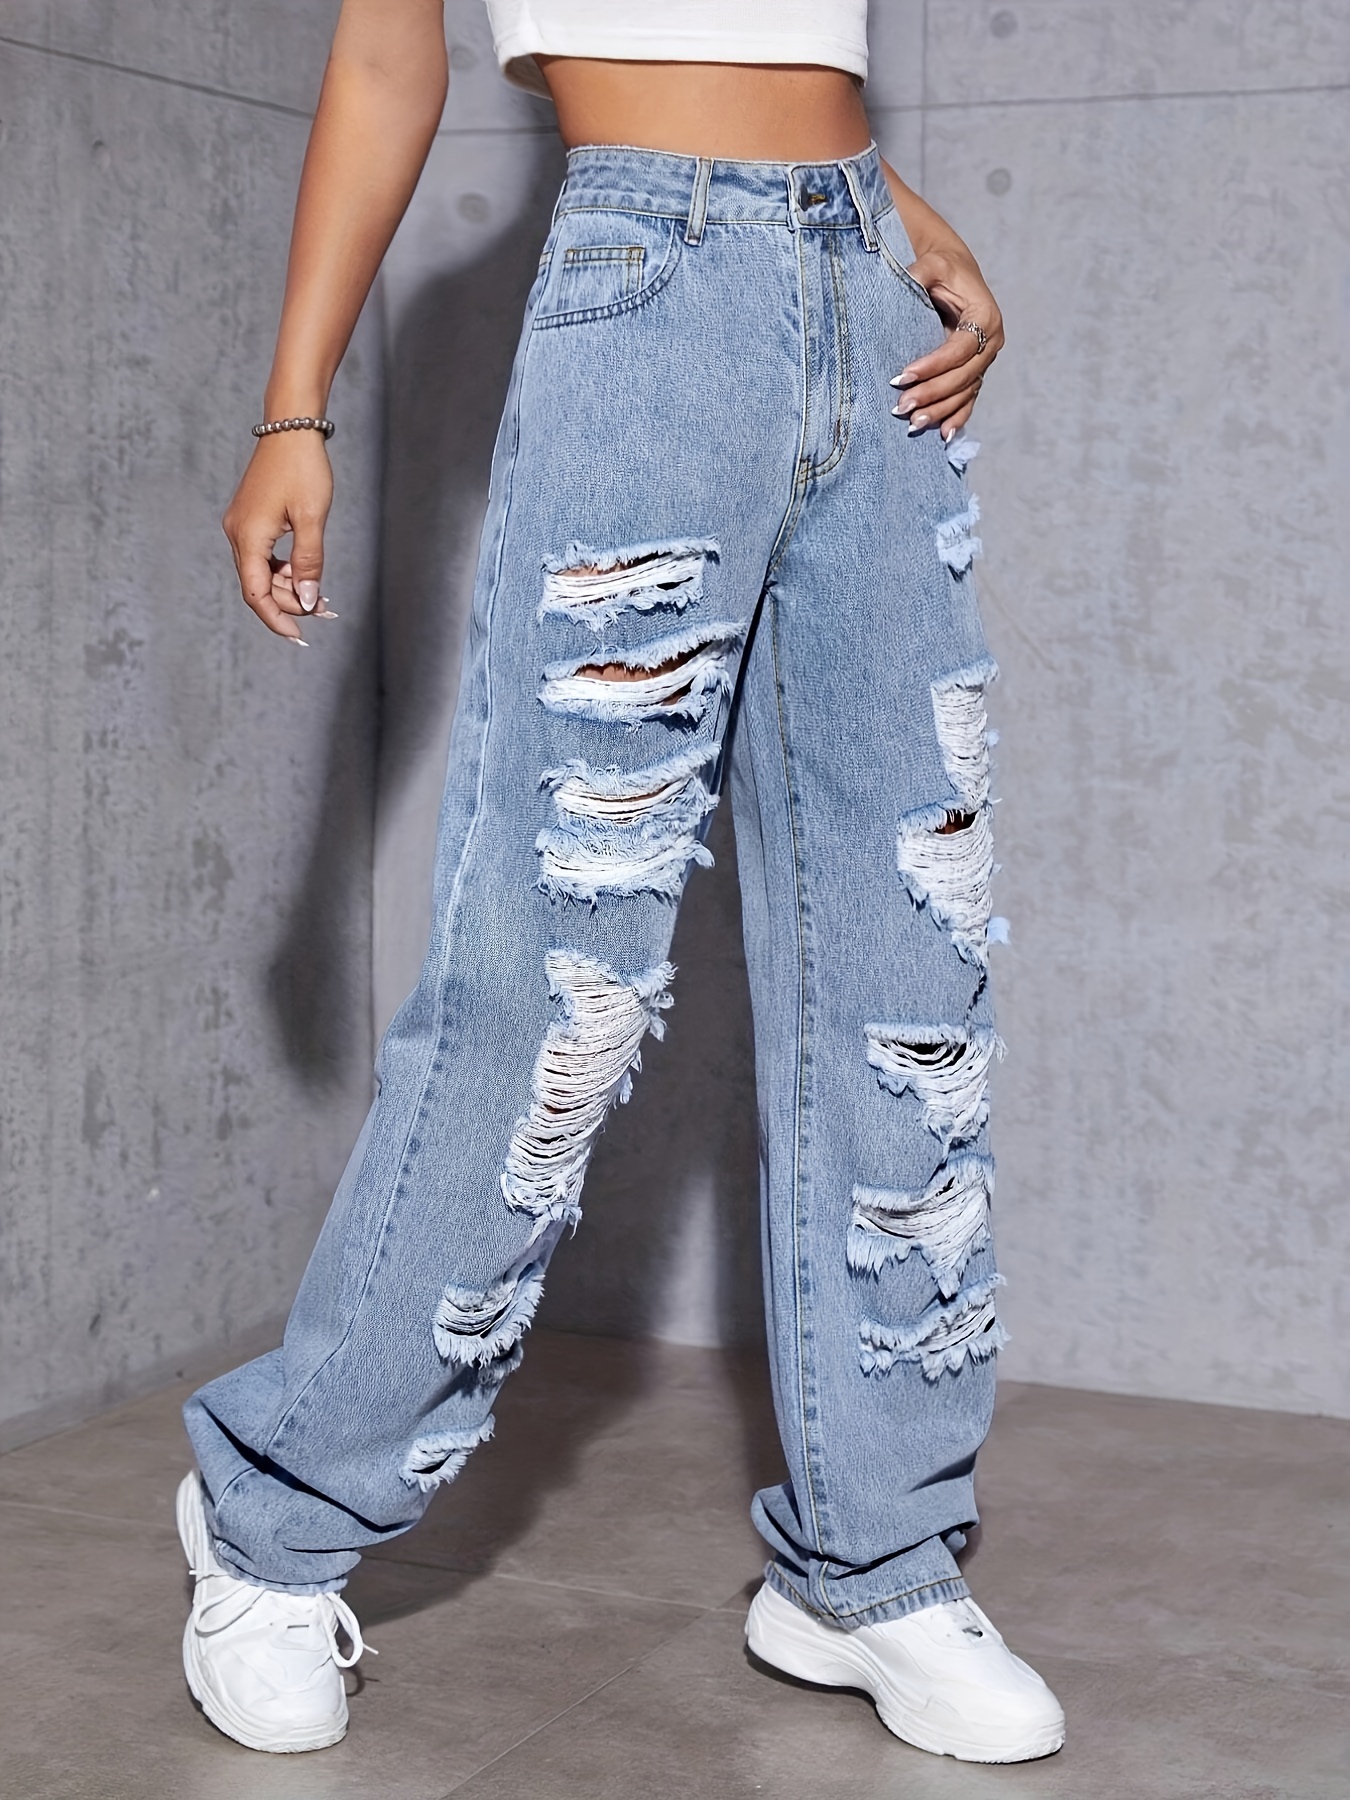 Women Slim Long Pants Ripped Frayed Jeans Casual Cropped Denim